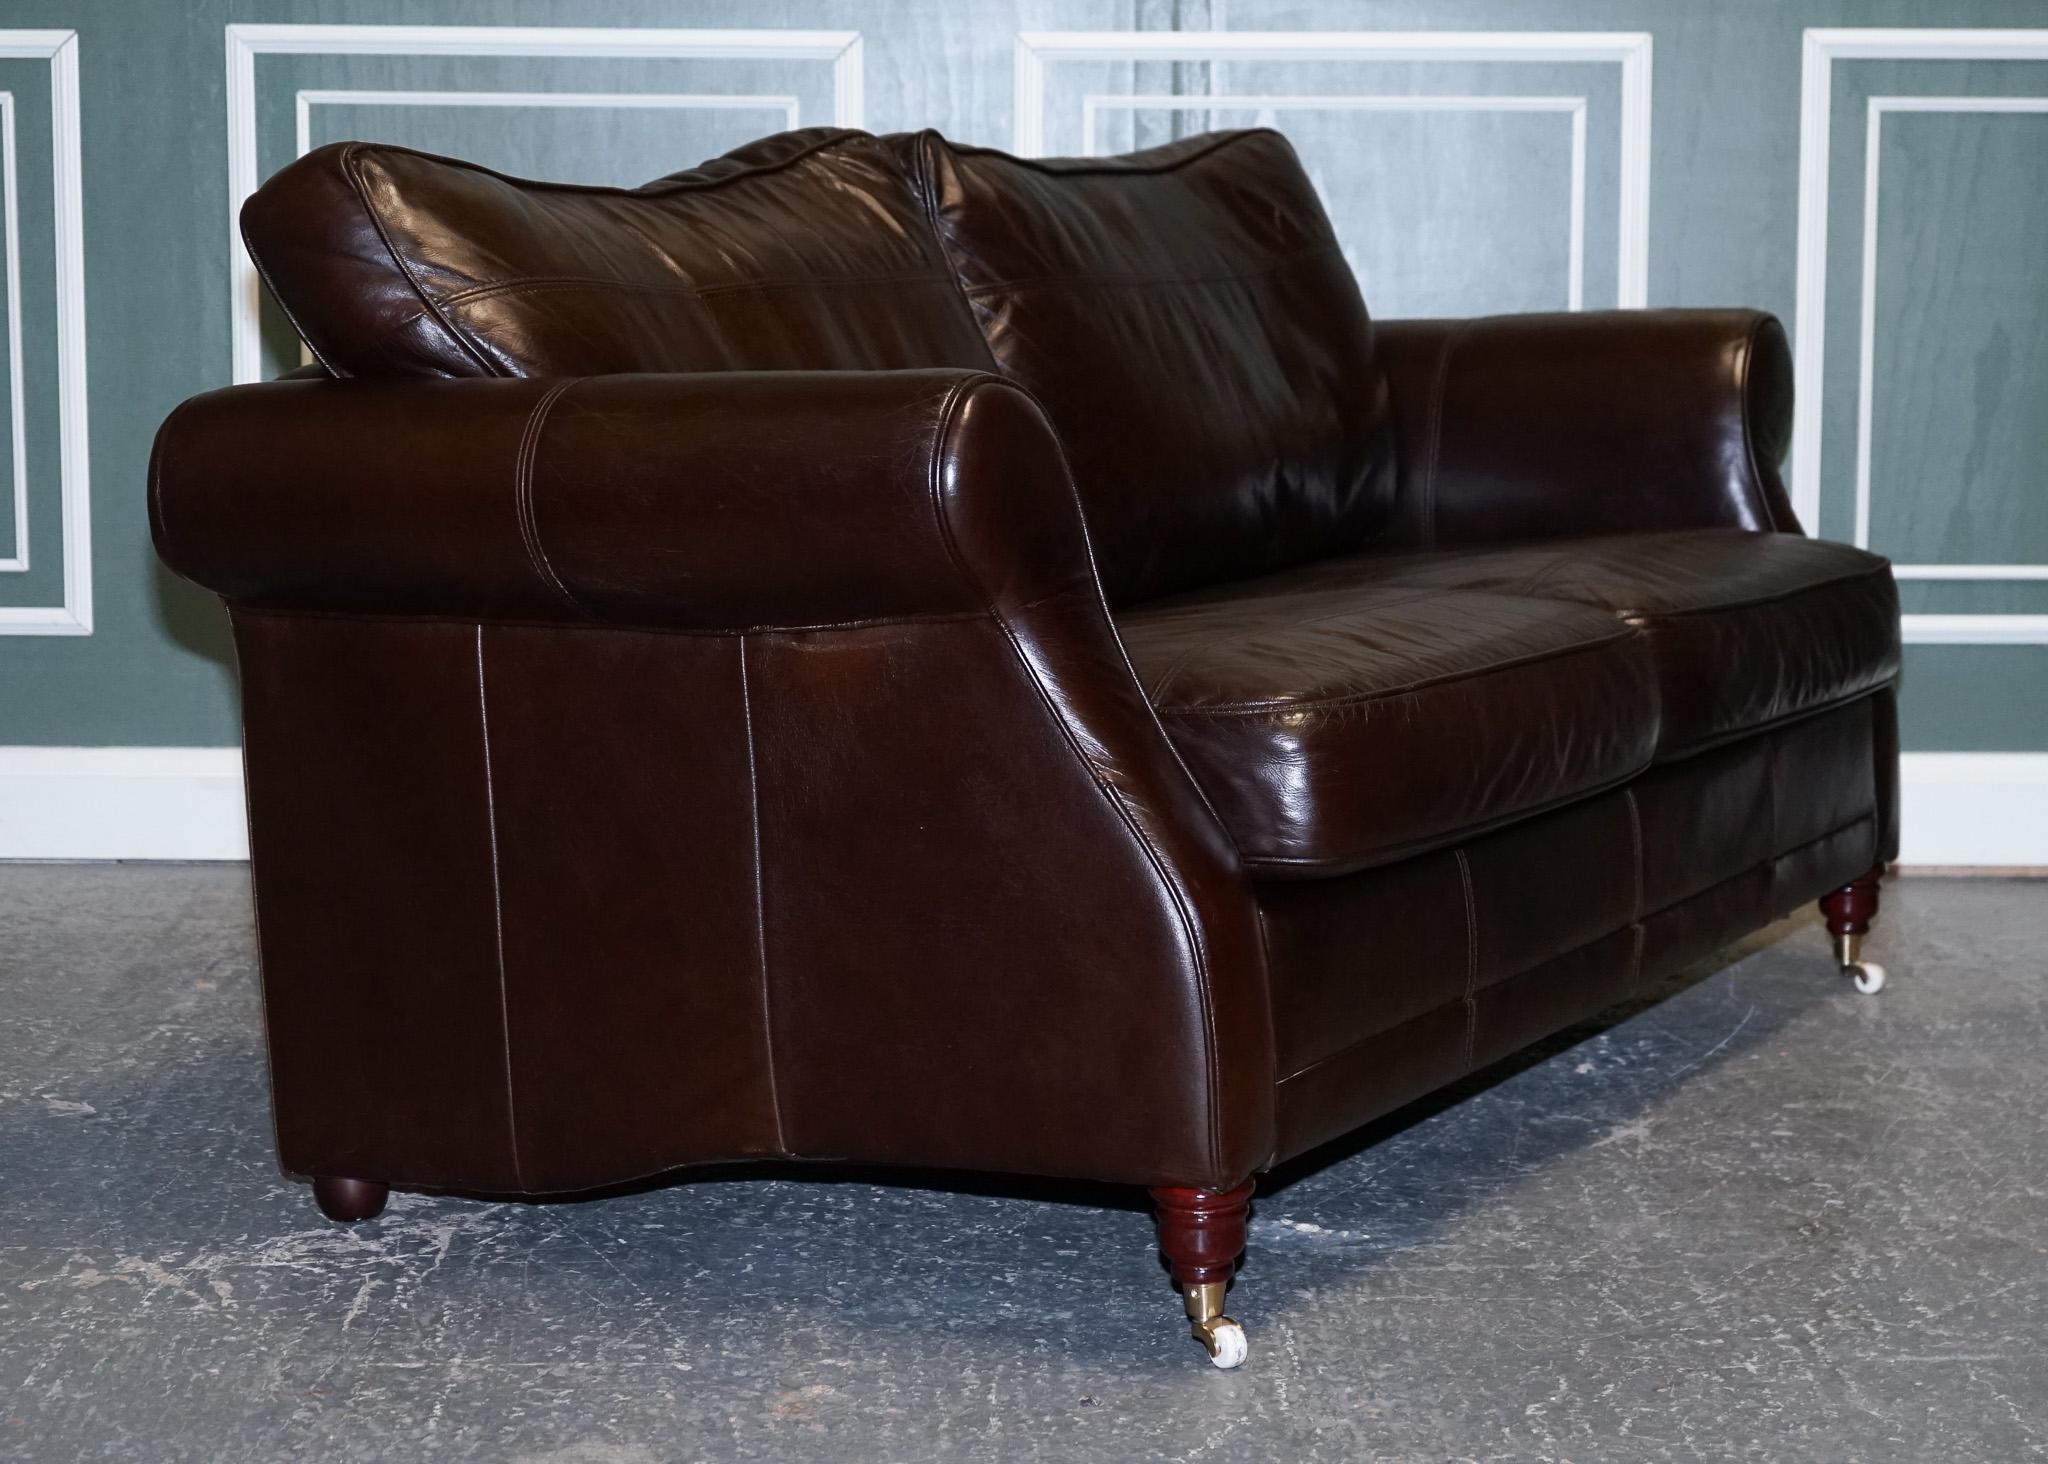 SOFA VINTAGE STUNNiNG CHOCOLATE BROWN LEATHER 2 TO 3 SEATER en vente 5